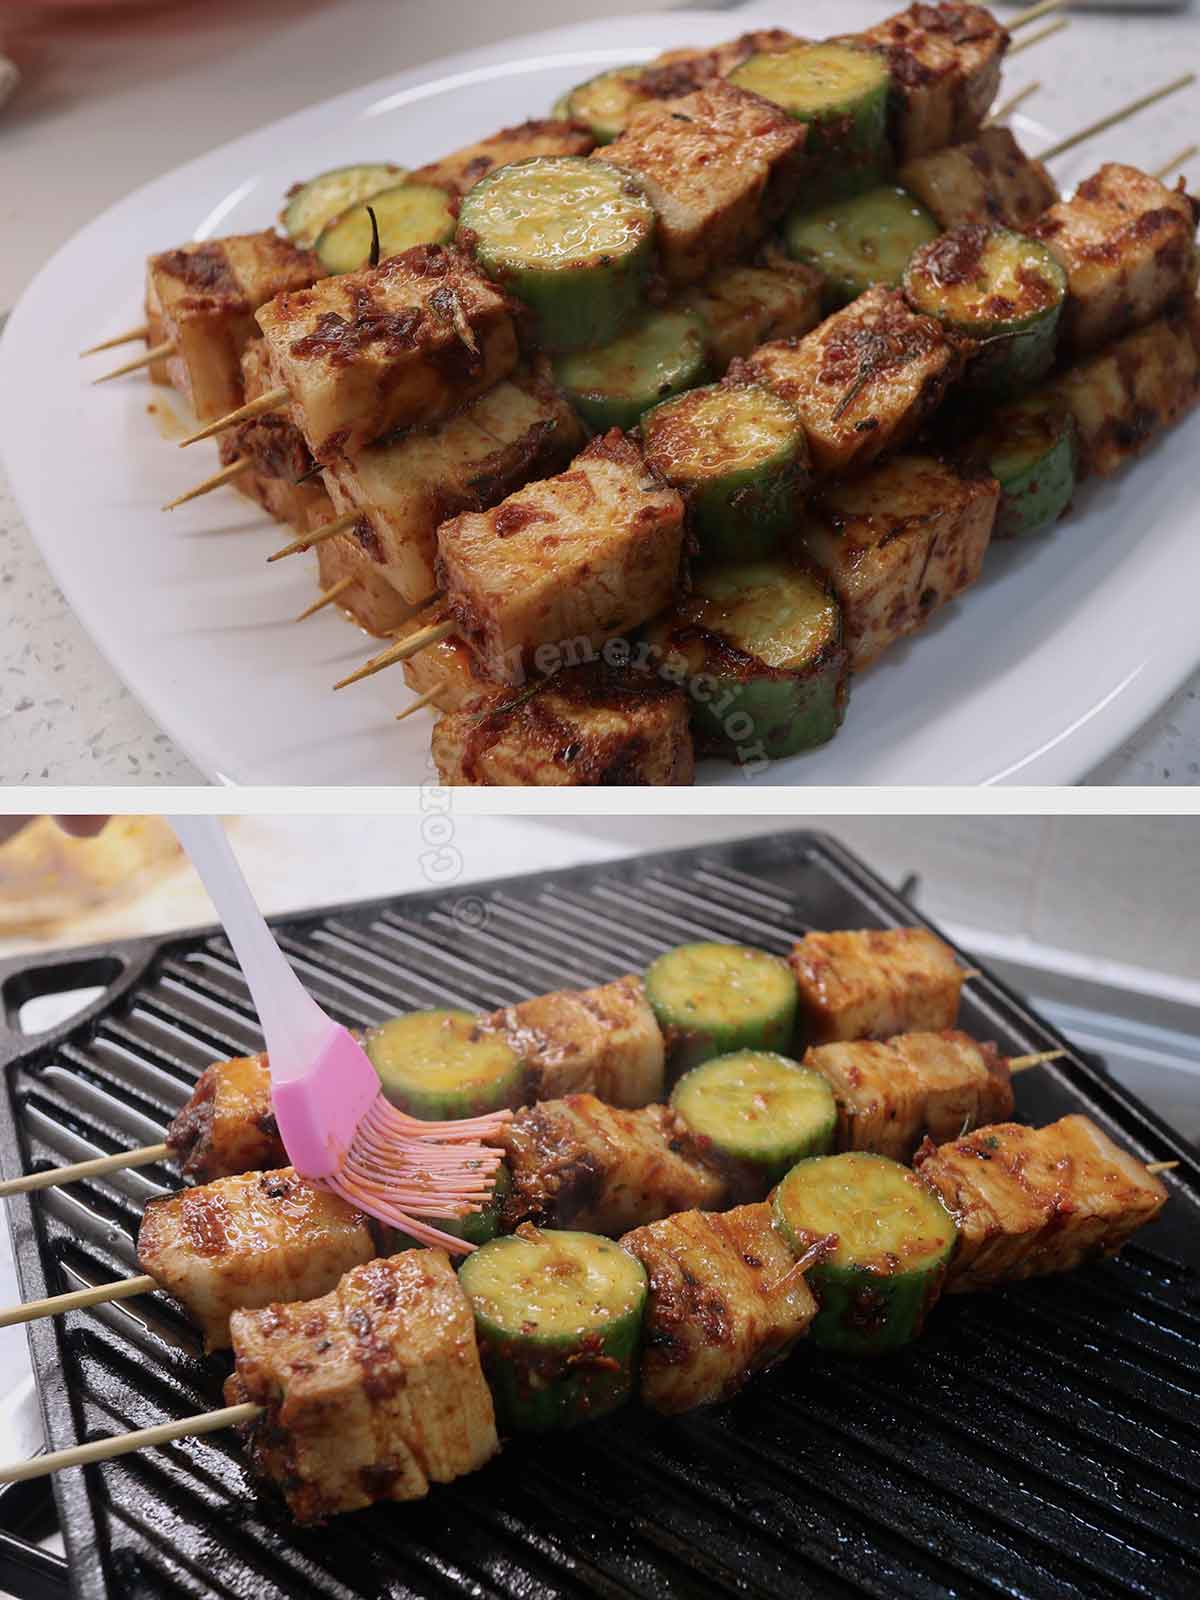 Skewered pork and zucchini on grill brushed with peri-peri sauce